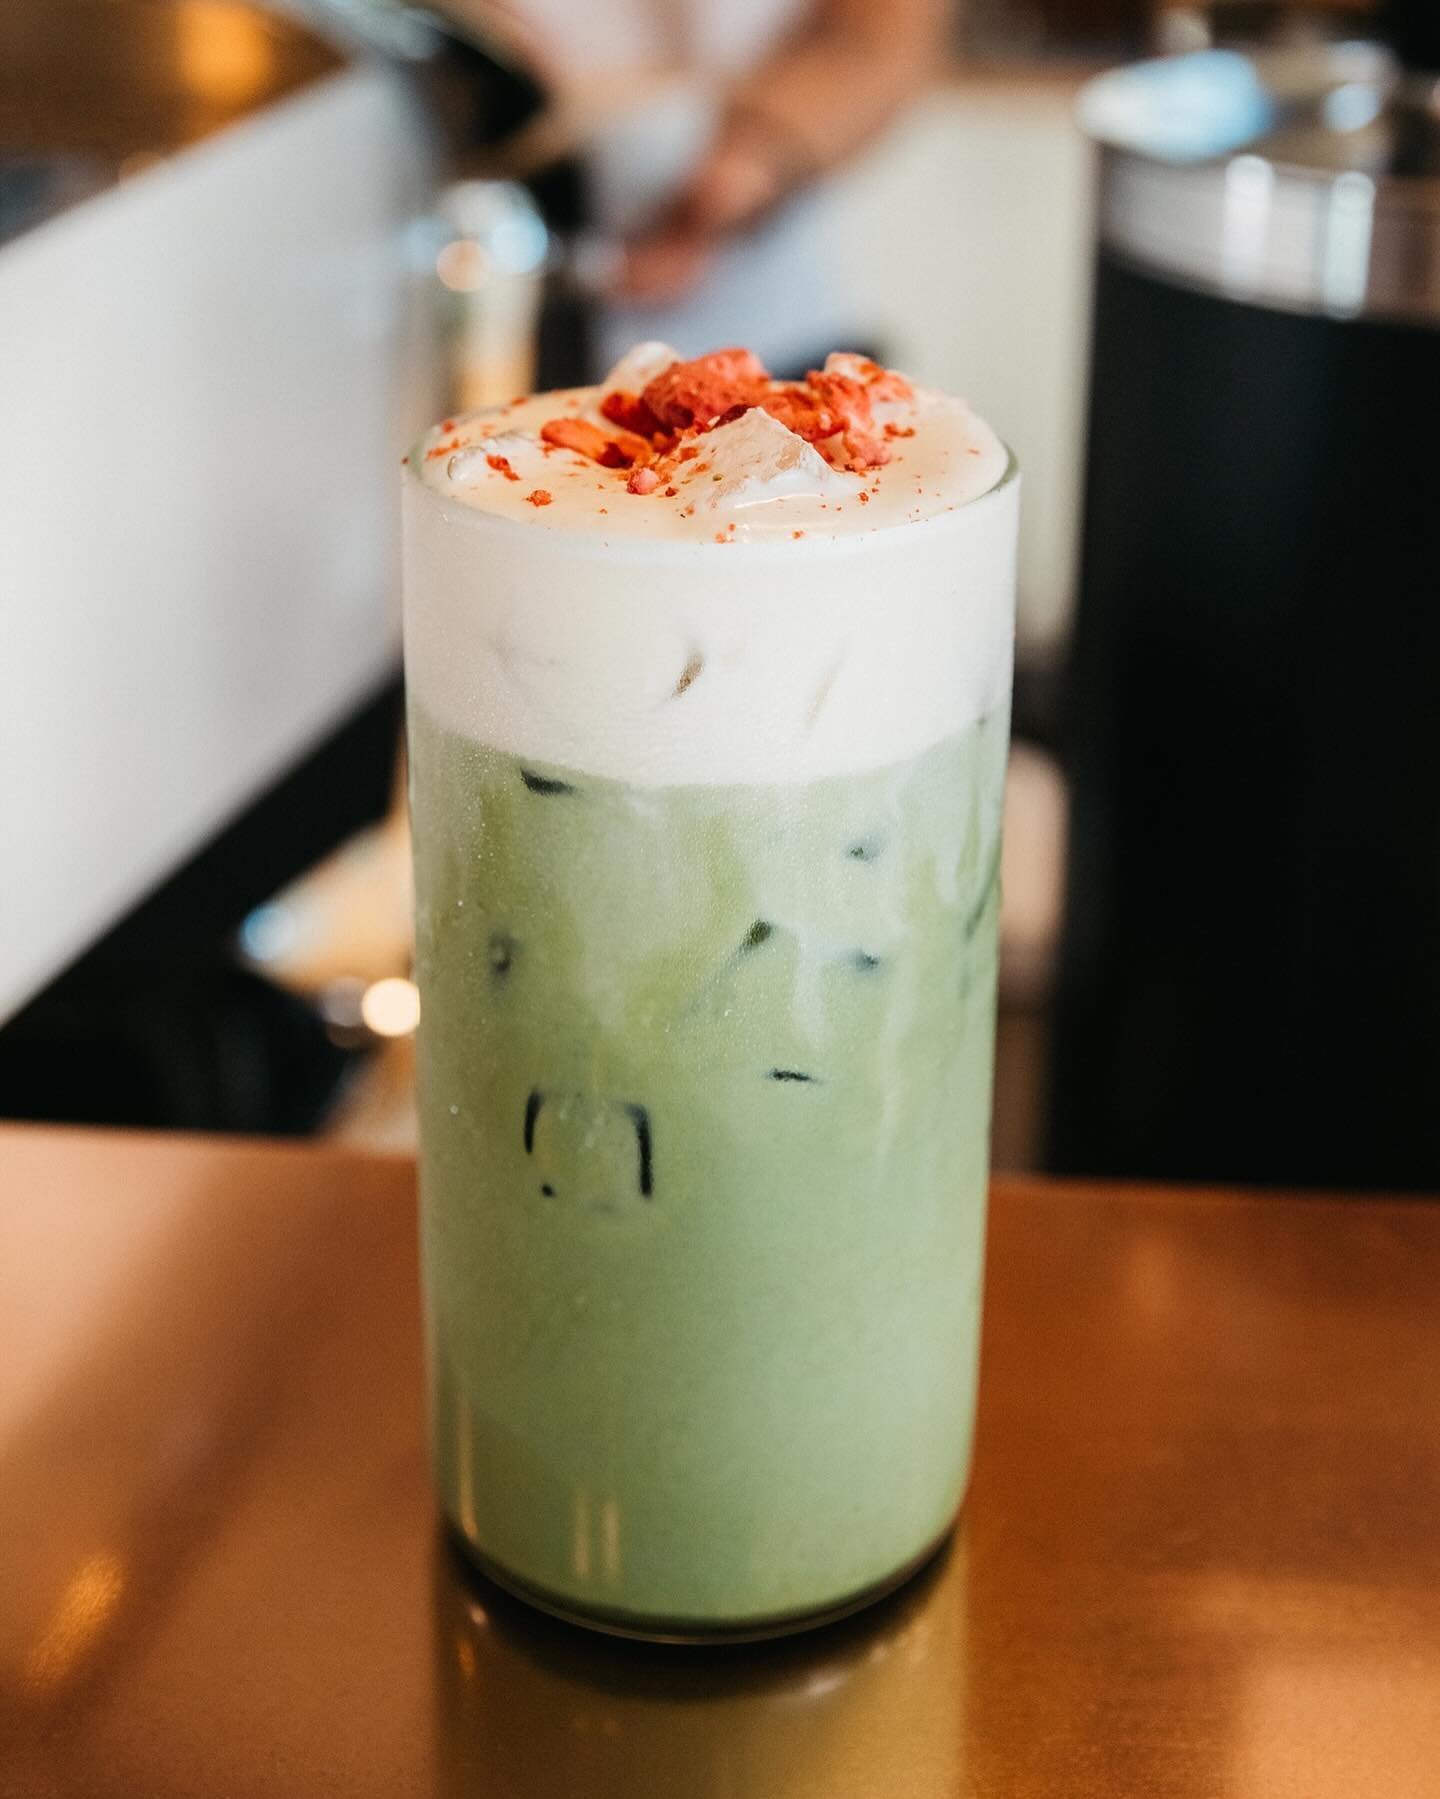 Strawberry Mint Matcha 🍵🍓

strawberry mint syrup paired with our ceremonial grade @santematcha, poured over ice and topped with a sweet mint cold foam + dehydrated strawberry

refreshing, delicious, + perfect for springtime!